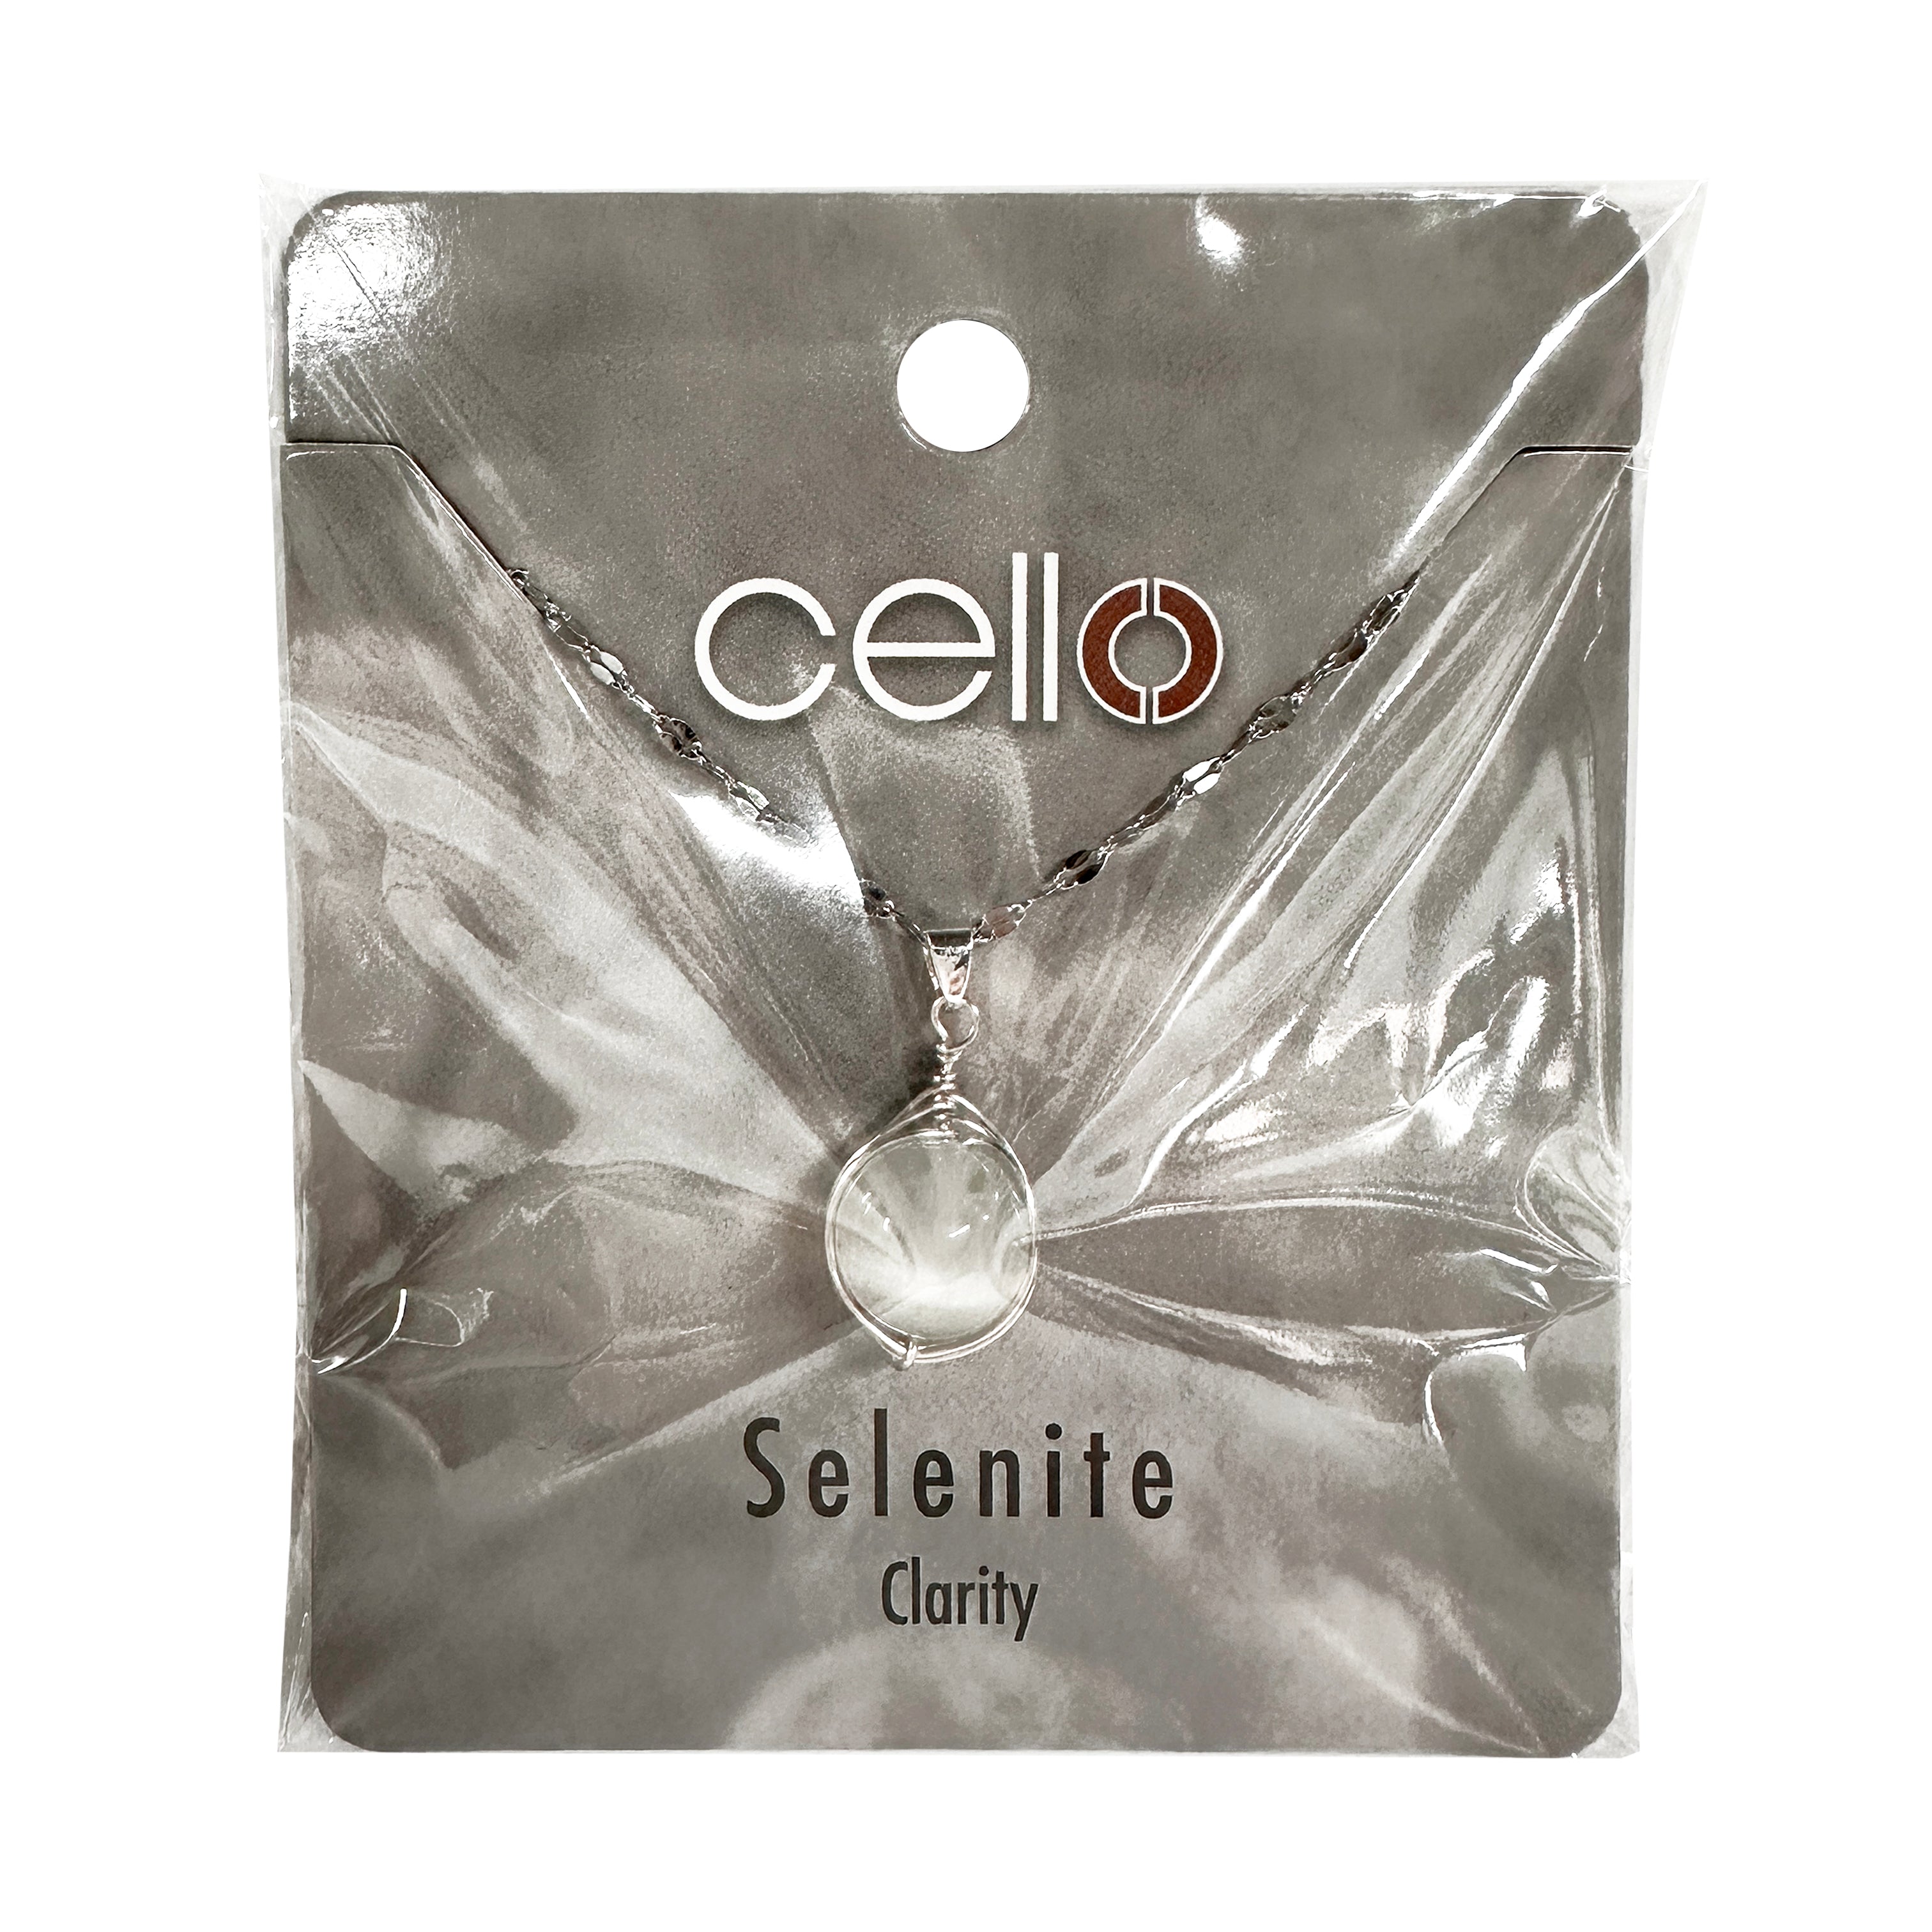 Known to help remove negative energy and clear minds, Selenite is the perfect stone to promote
positivity. Mental clarity will be in abundance lifting you to higher levels of awareness.